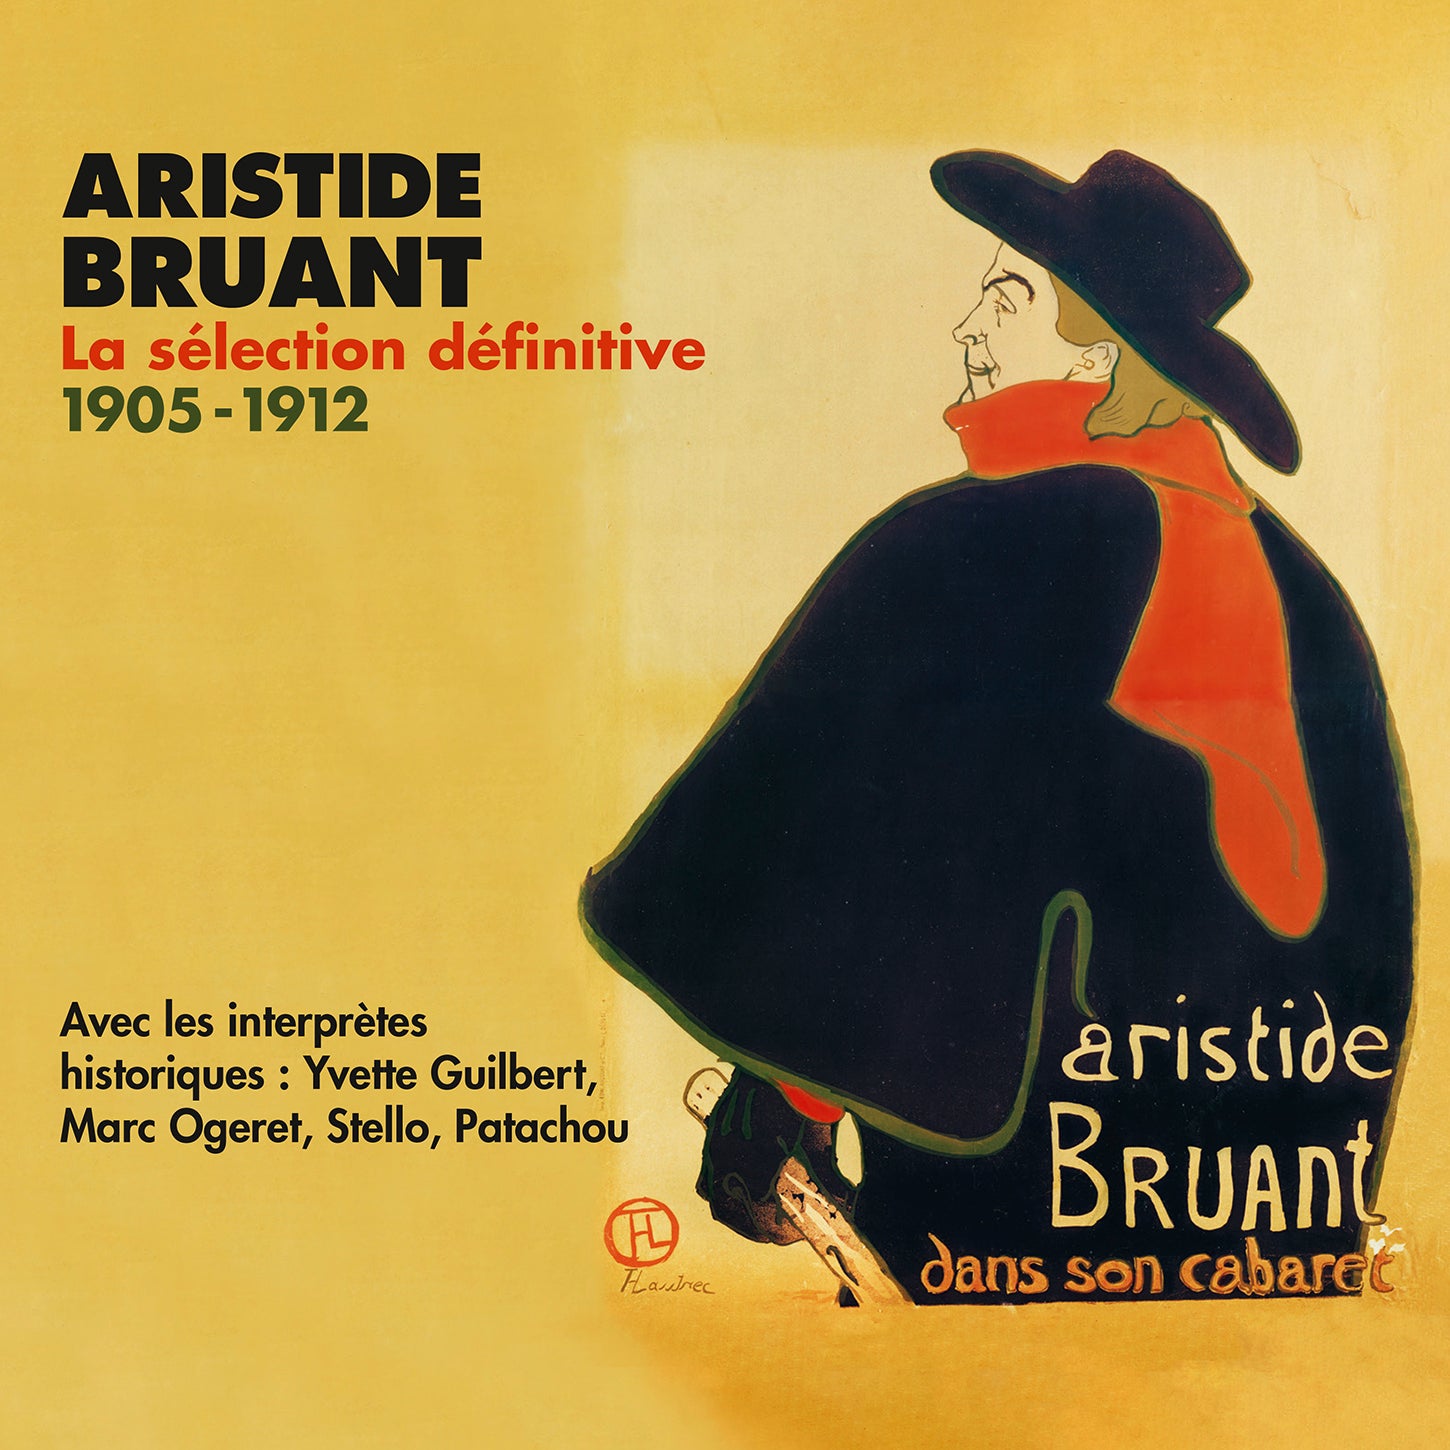 Aristide Bruant: The Definitive Selection, 1905-1912